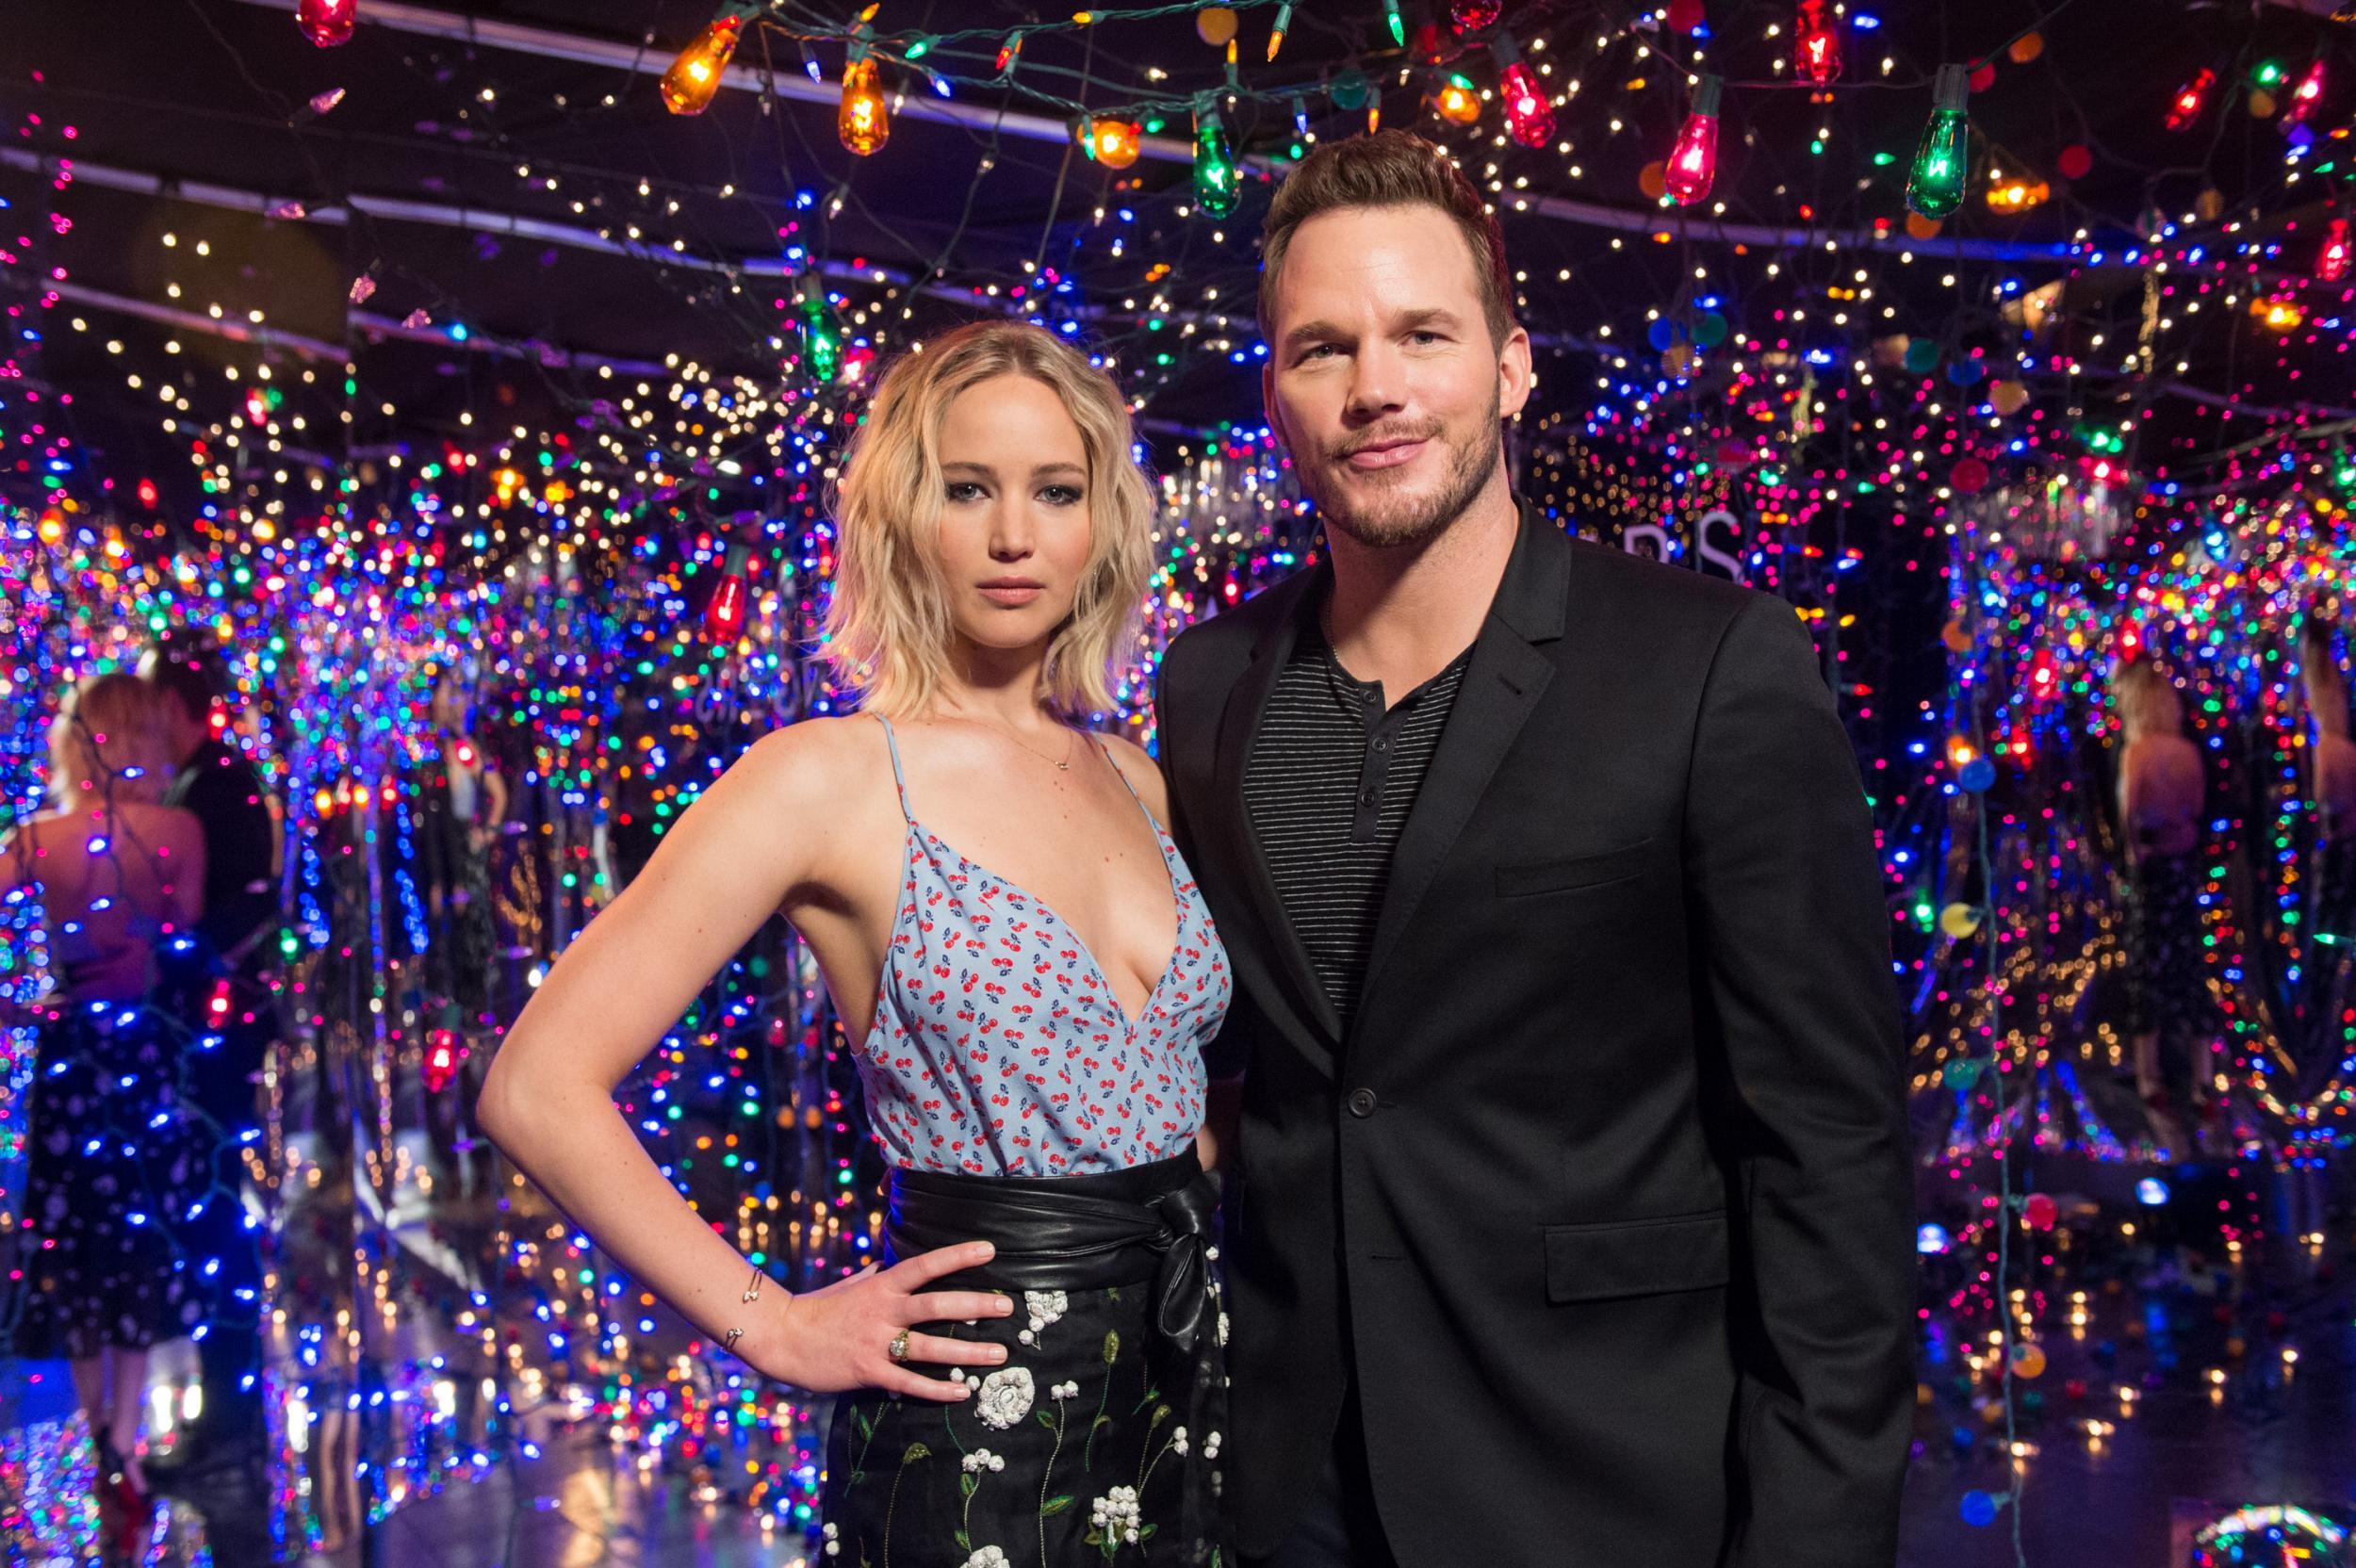 Jennifer Lawrence and Chris Pratt at a Passengers photocall in Los Angeles